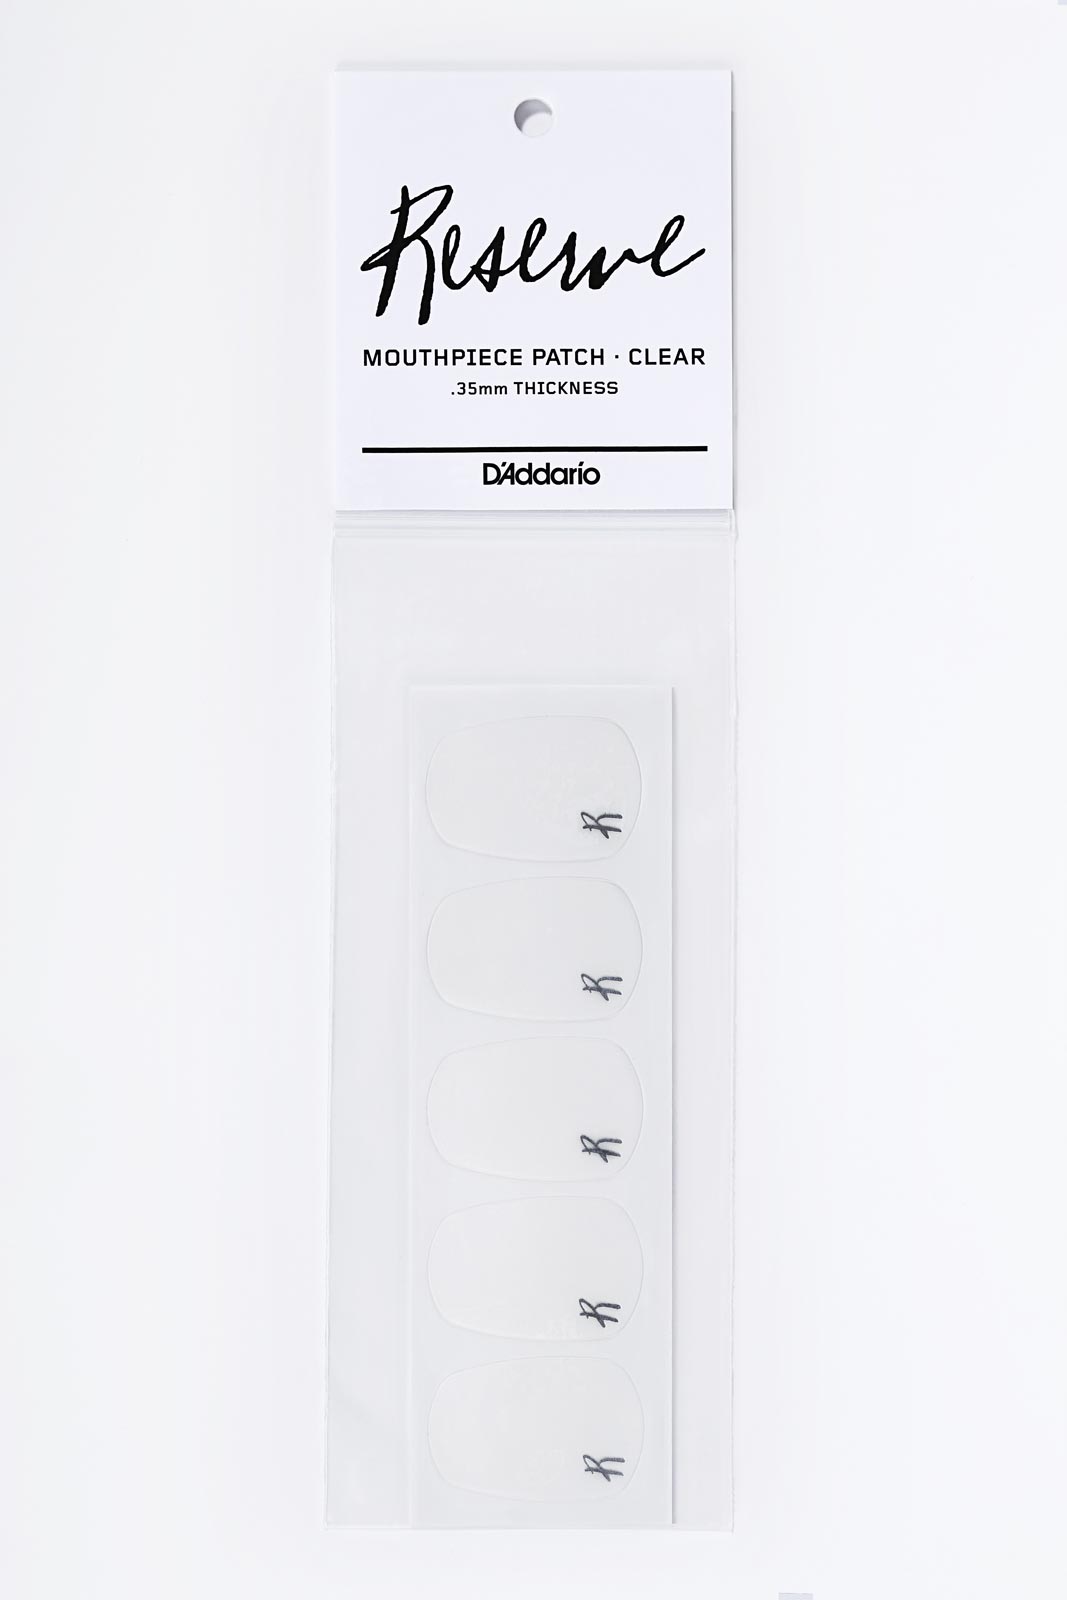 D'ADDARIO - RICO RESERVE MOUTHPIECE PATCH CLEAR 5 PACK